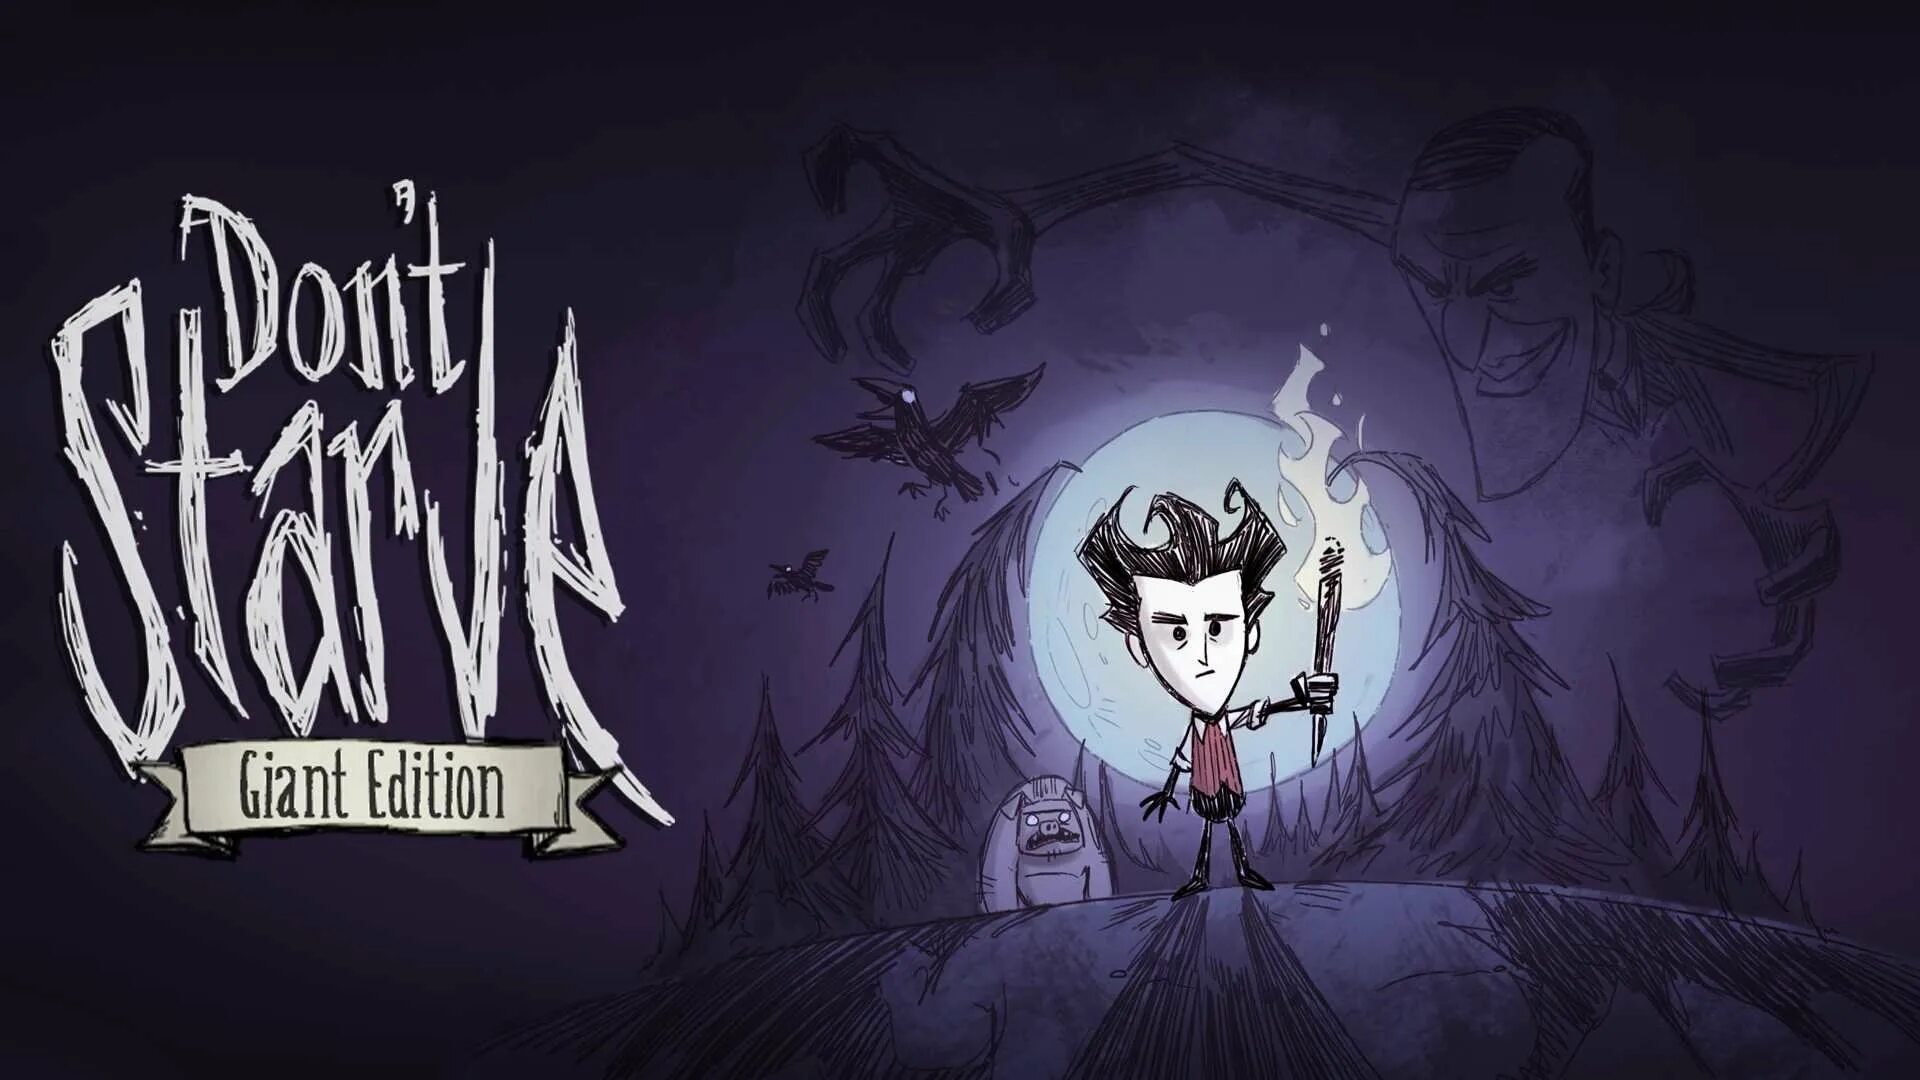 Don t Starve игра. Don't Starve превью. Don't Starve together игрушки. Don't Starve together 2+2=?. Донт старв длс